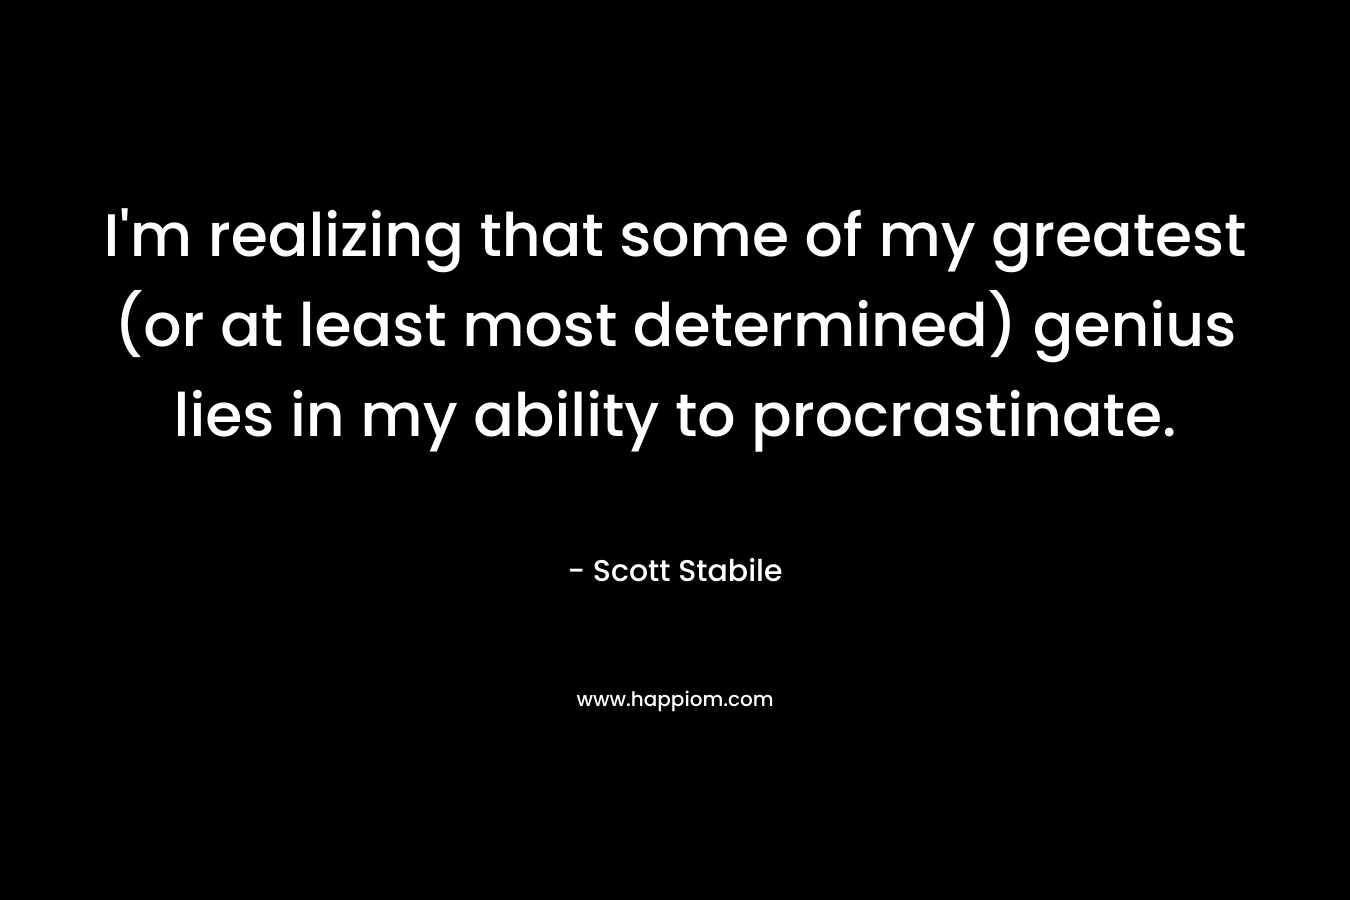 I’m realizing that some of my greatest (or at least most determined) genius lies in my ability to procrastinate. – Scott Stabile